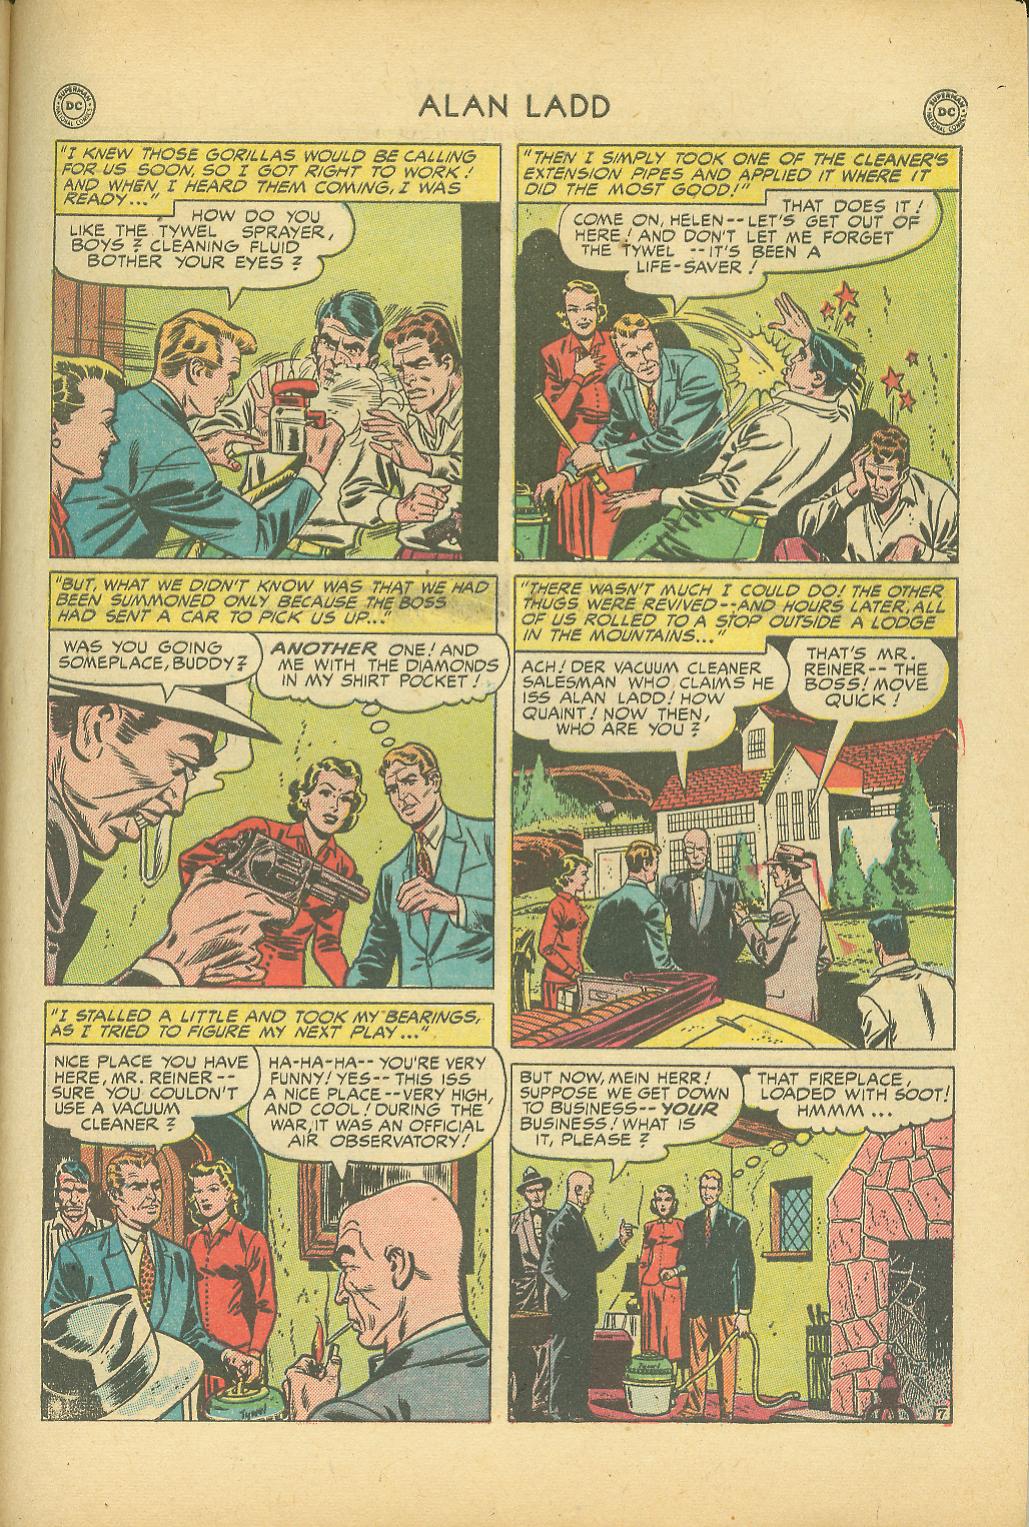 Read online Adventures of Alan Ladd comic -  Issue #5 - 45